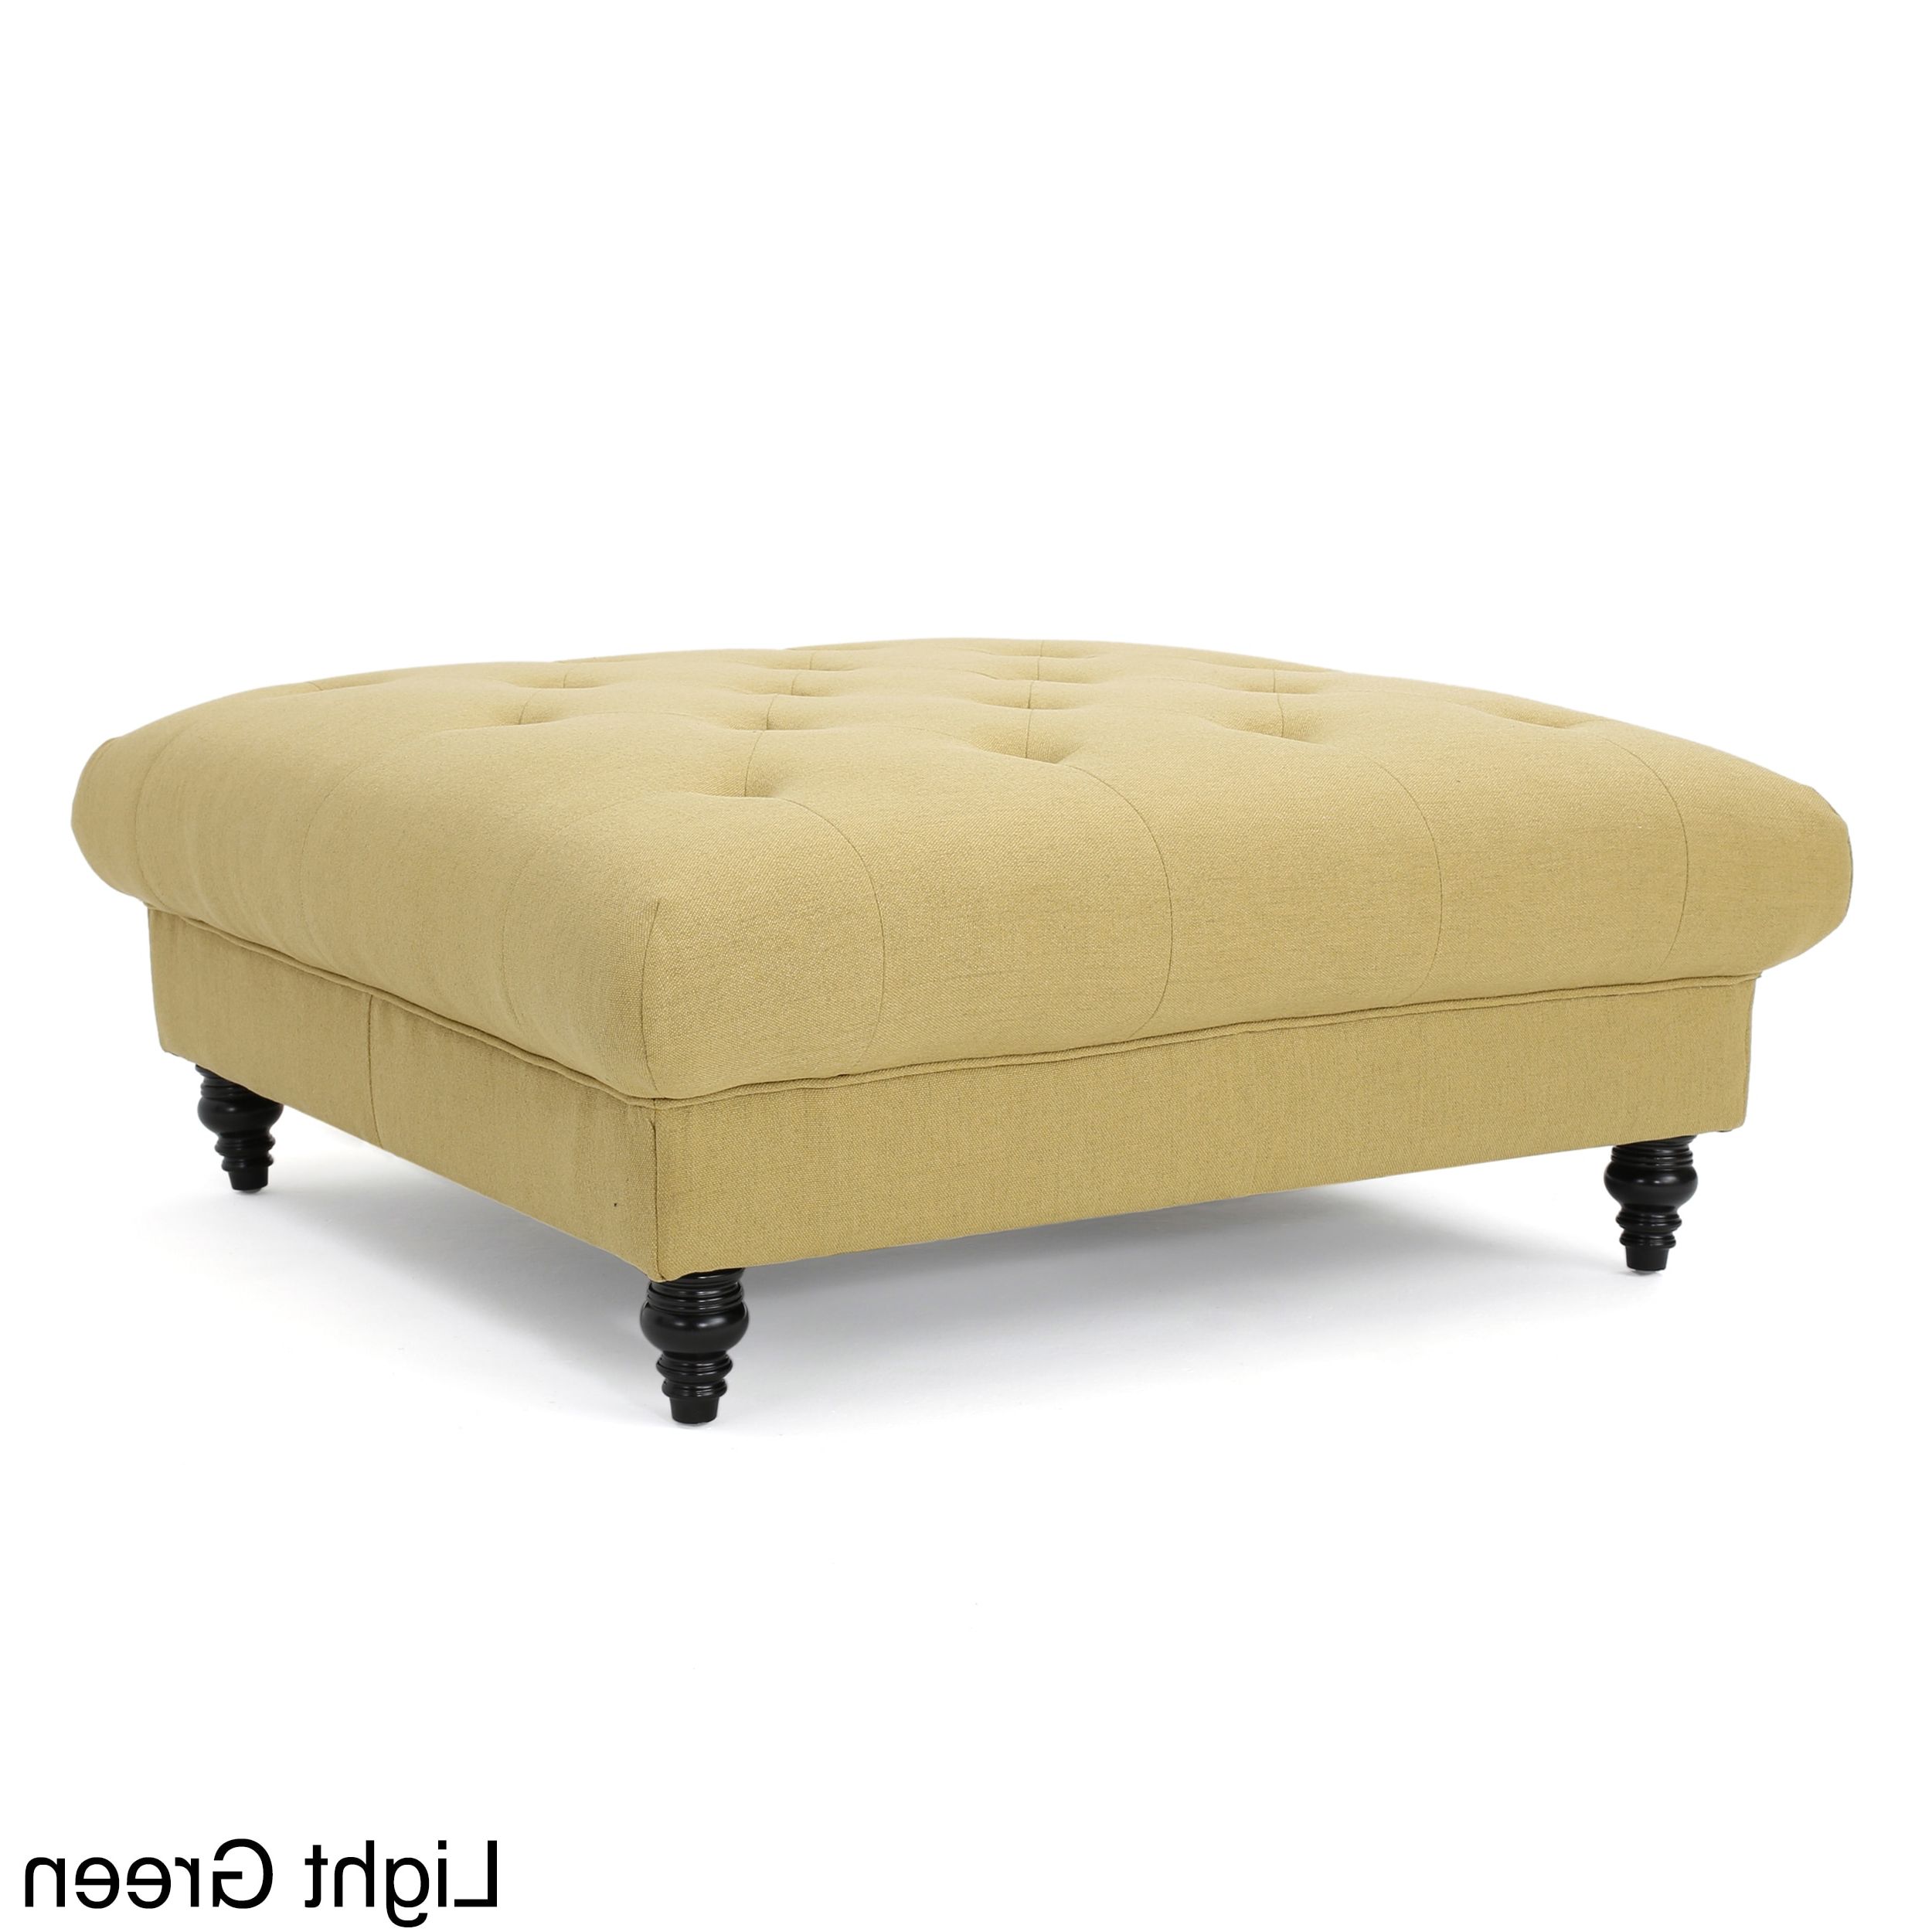 Square Ottoman In Light Green – Walmart Pertaining To Trendy Green Pouf Ottomans (View 8 of 10)